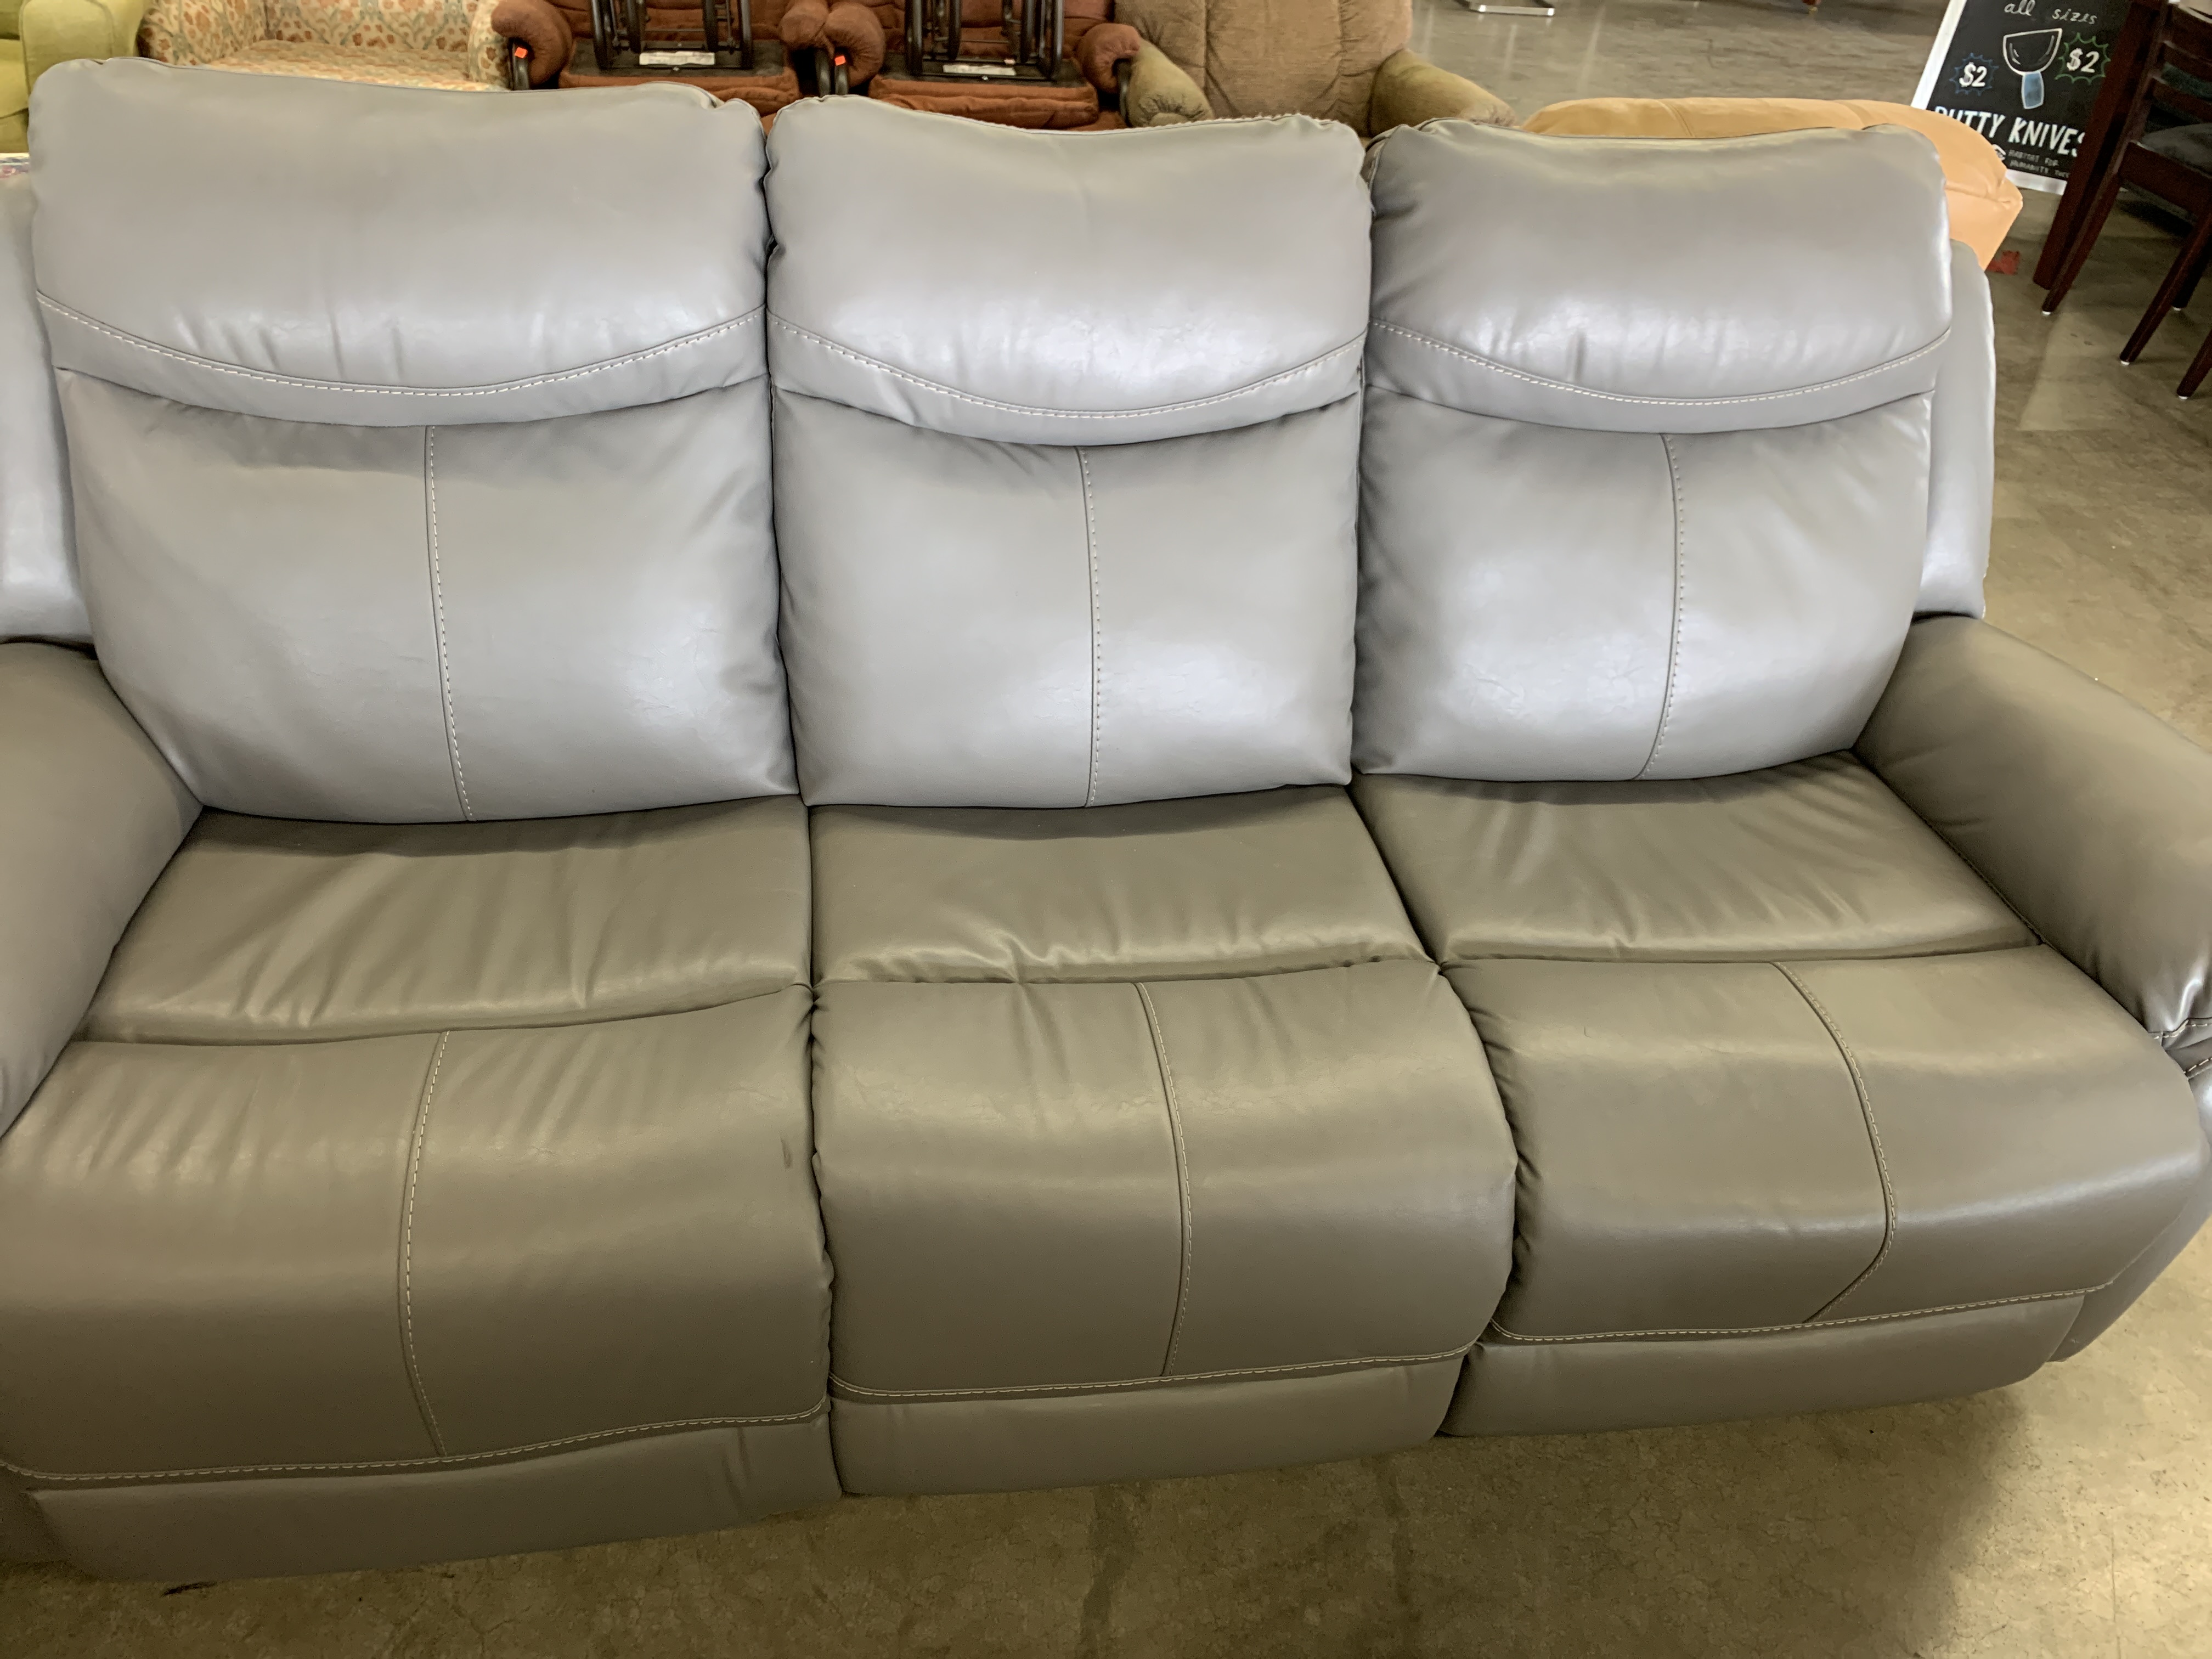 simulated leather sofa meaning